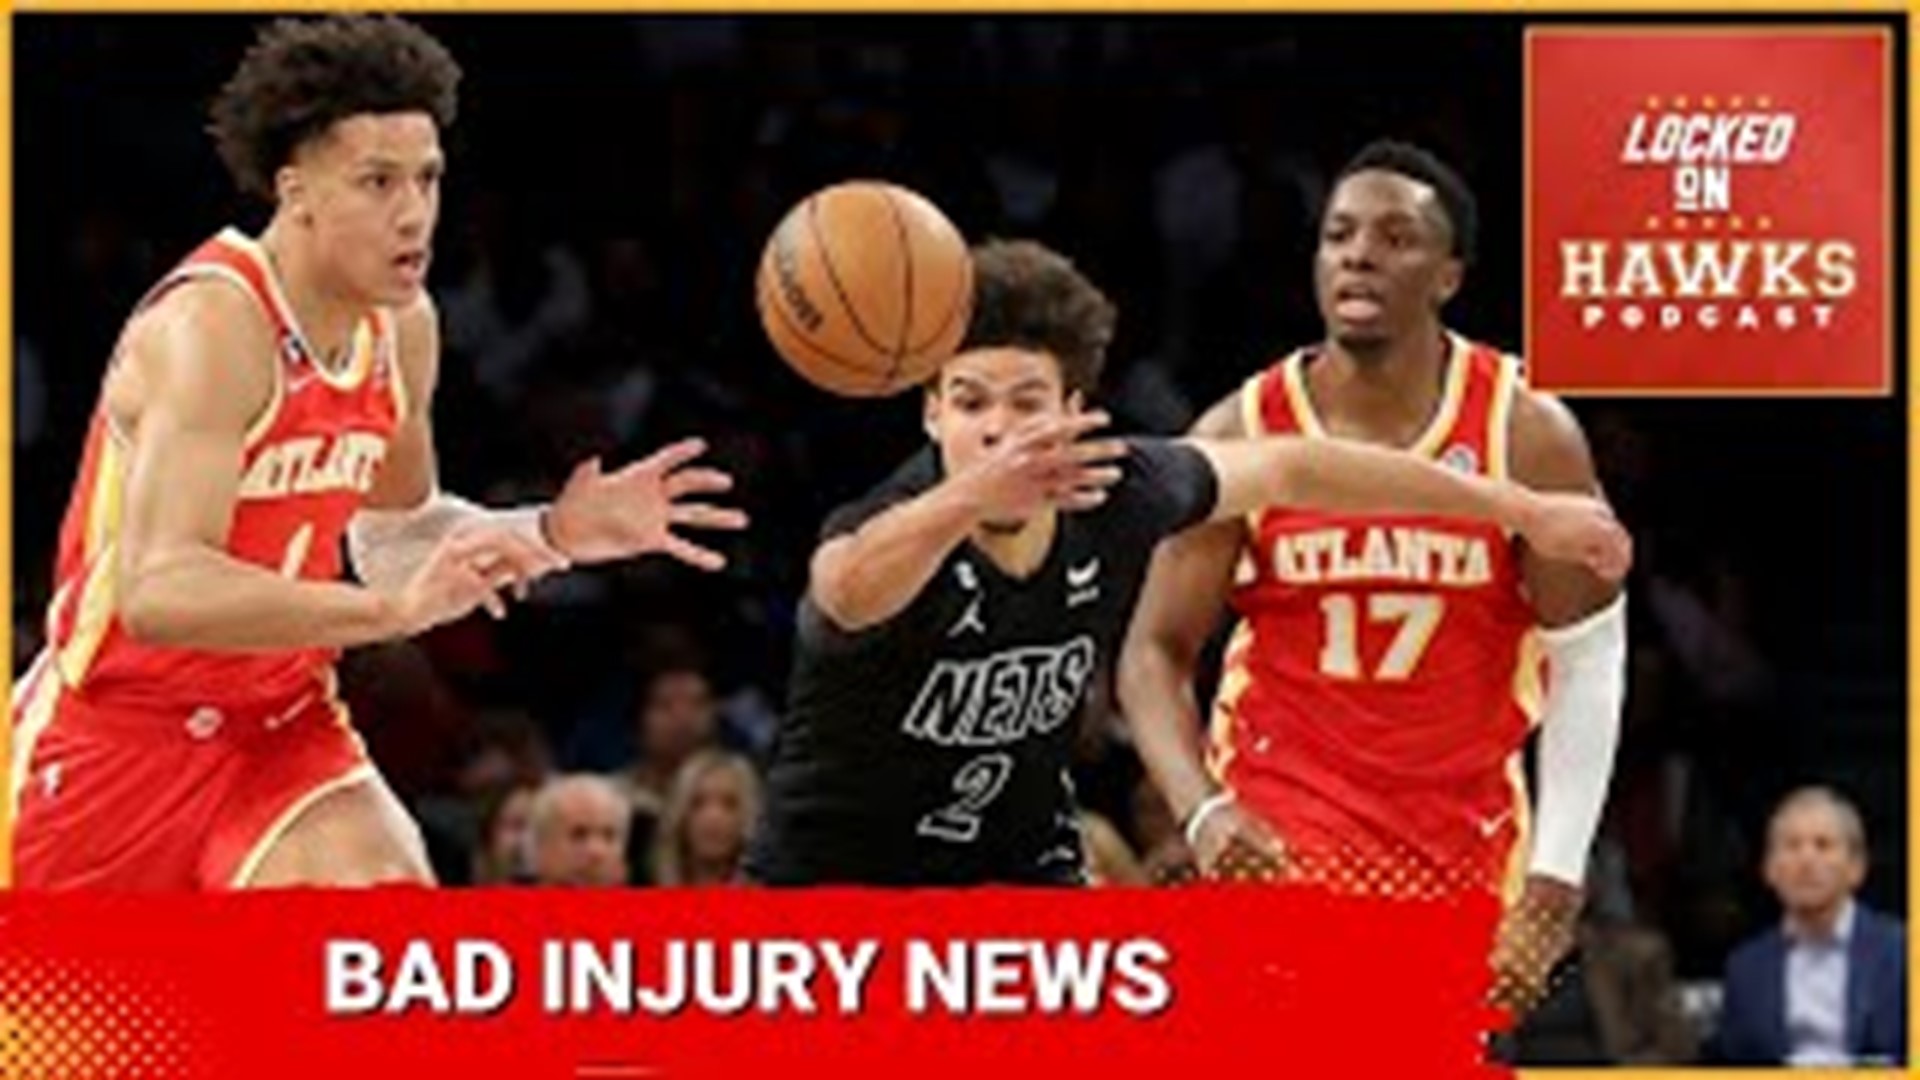 Brad Rowland hosts episode No. 1692 of the Locked on Hawks podcast. The show reacts in emergency fashion to the news that Jalen Johnson.